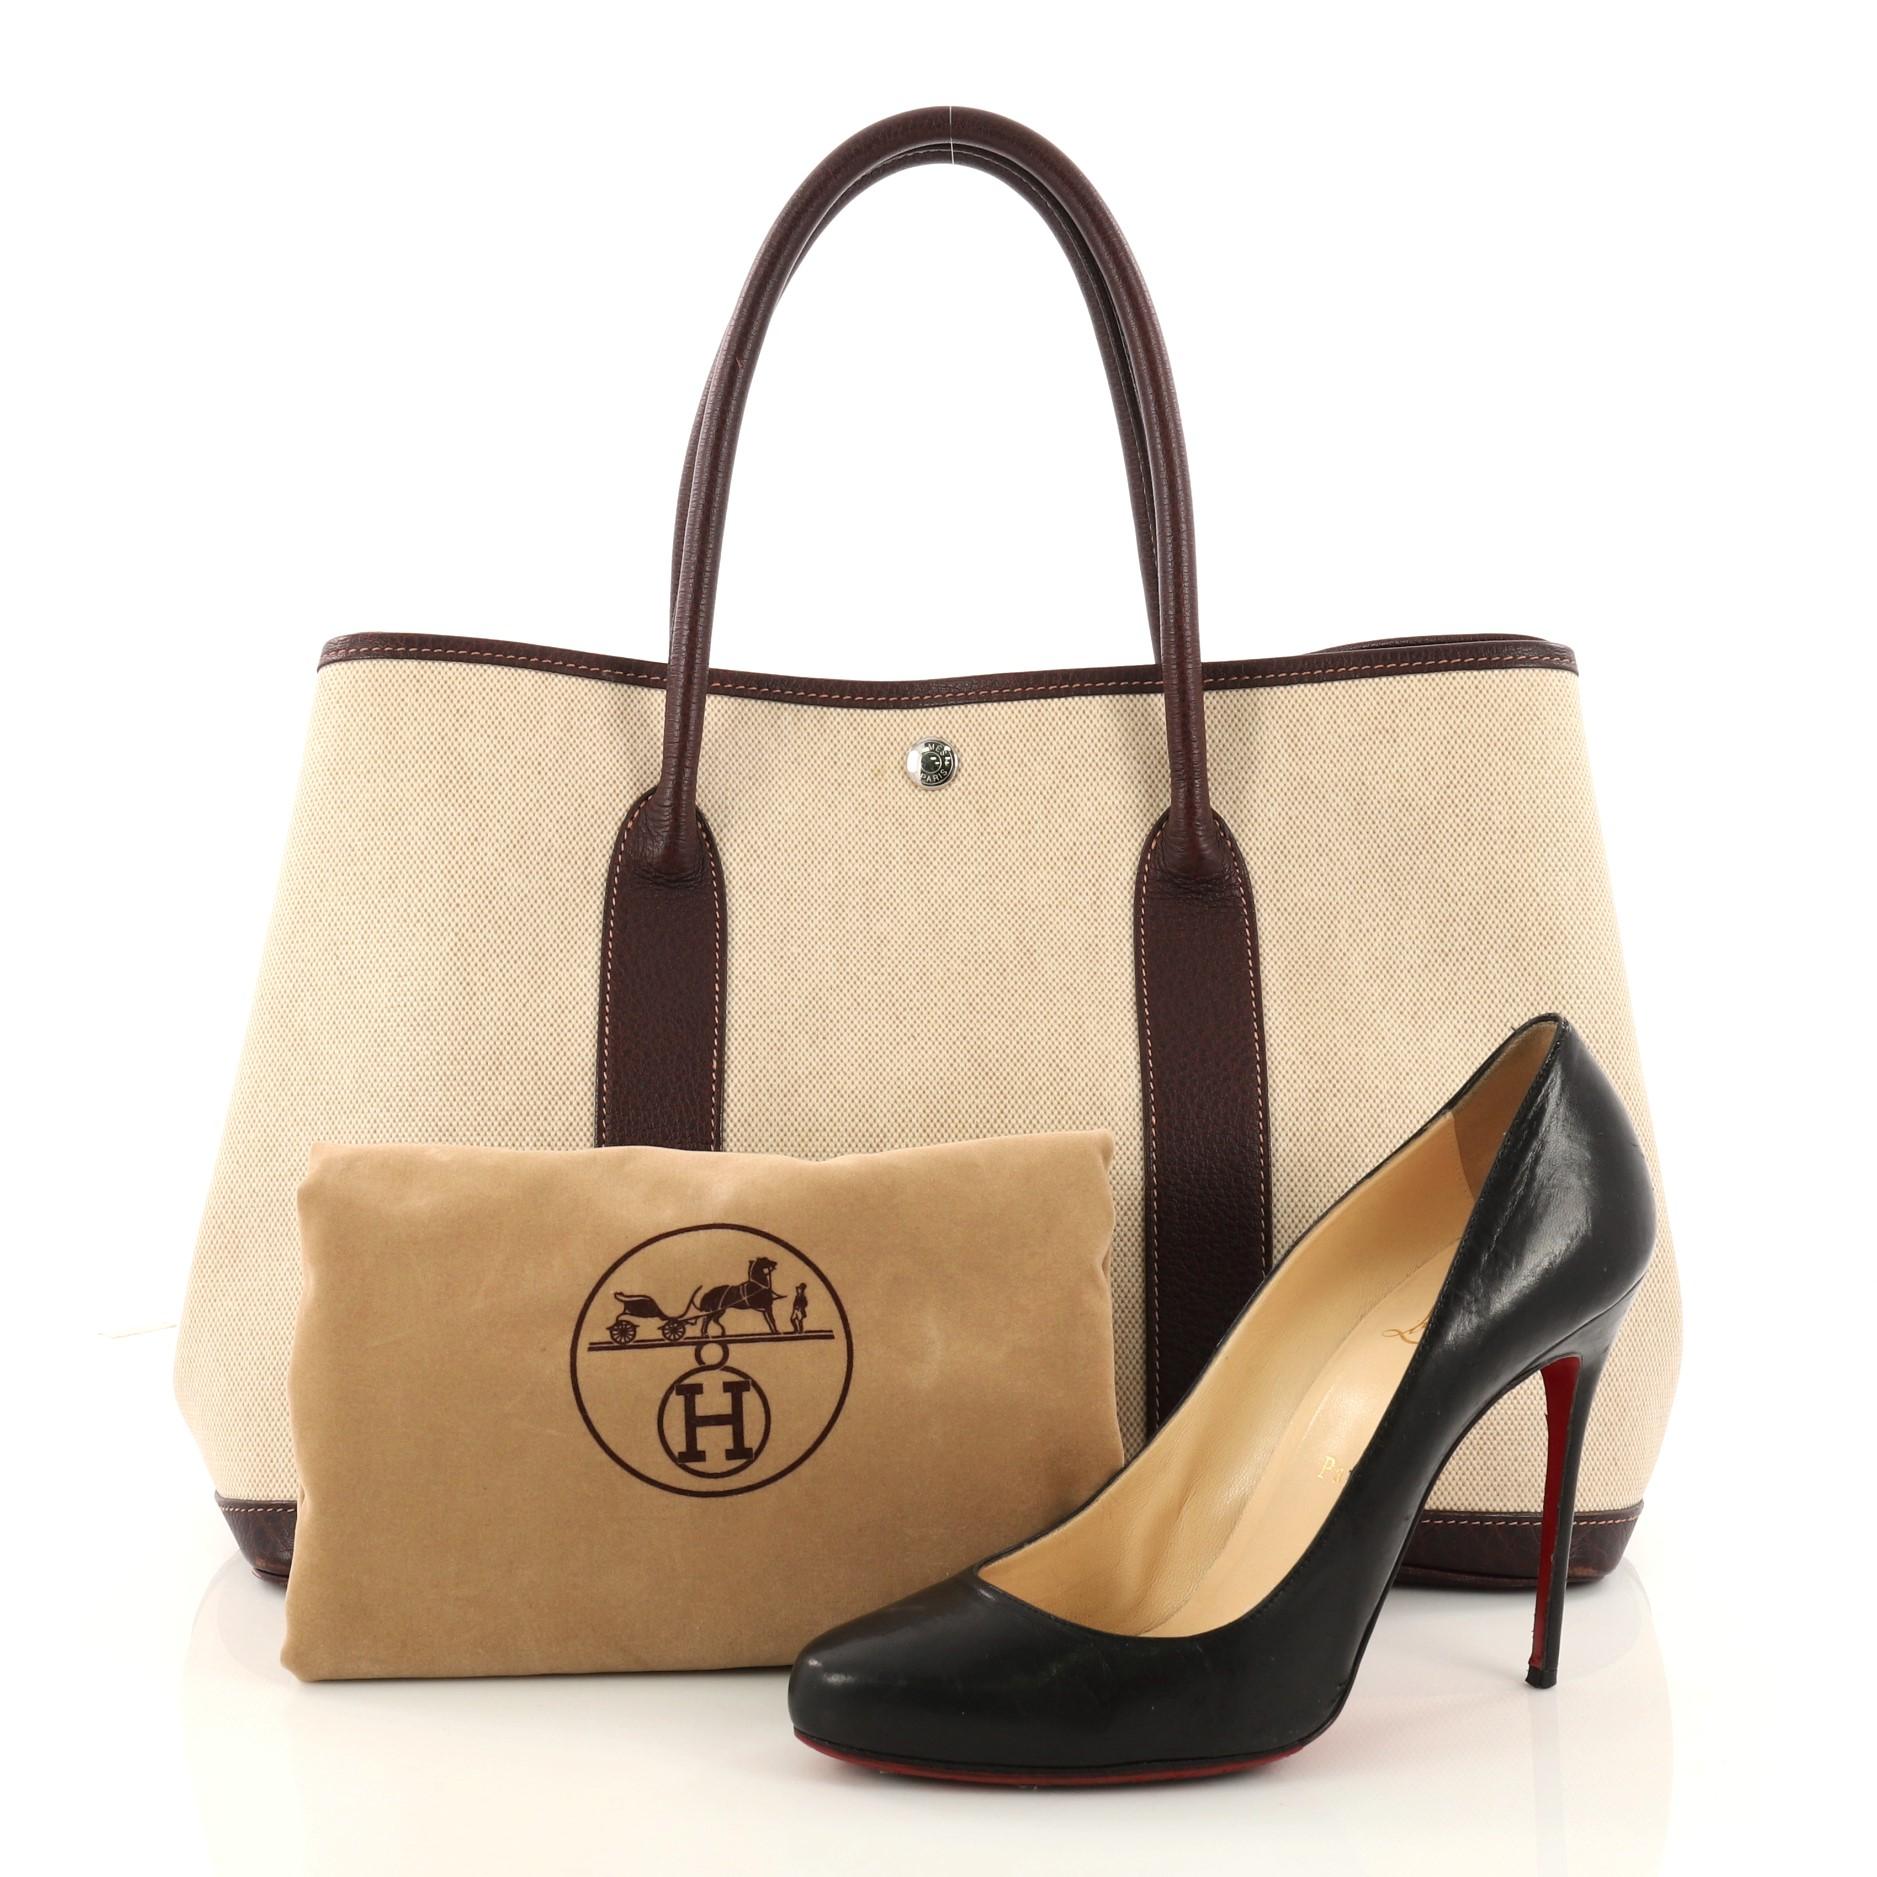 This authentic Hermes Garden Party Tote Toile and Leather 36 is an elegant and simple tote made for all seasons. Crafted from beige toile with wine buffalo leather trims, this chic everyday tote features dual-rolled leather top handles, stand-out